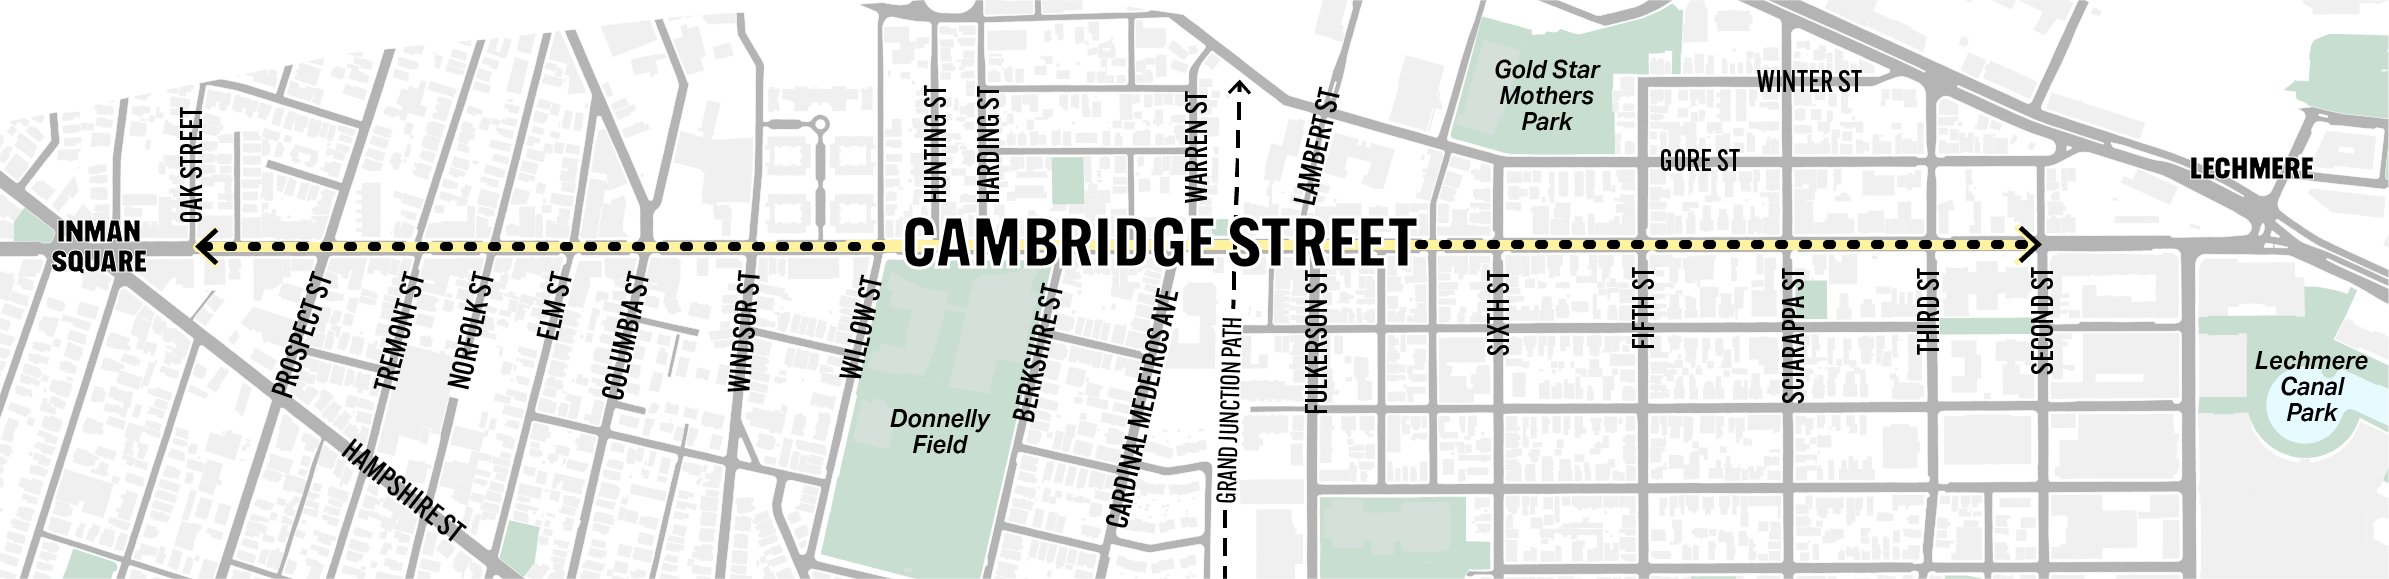 The Cambridge Street project begins an Oak Street and ends at Second Street.